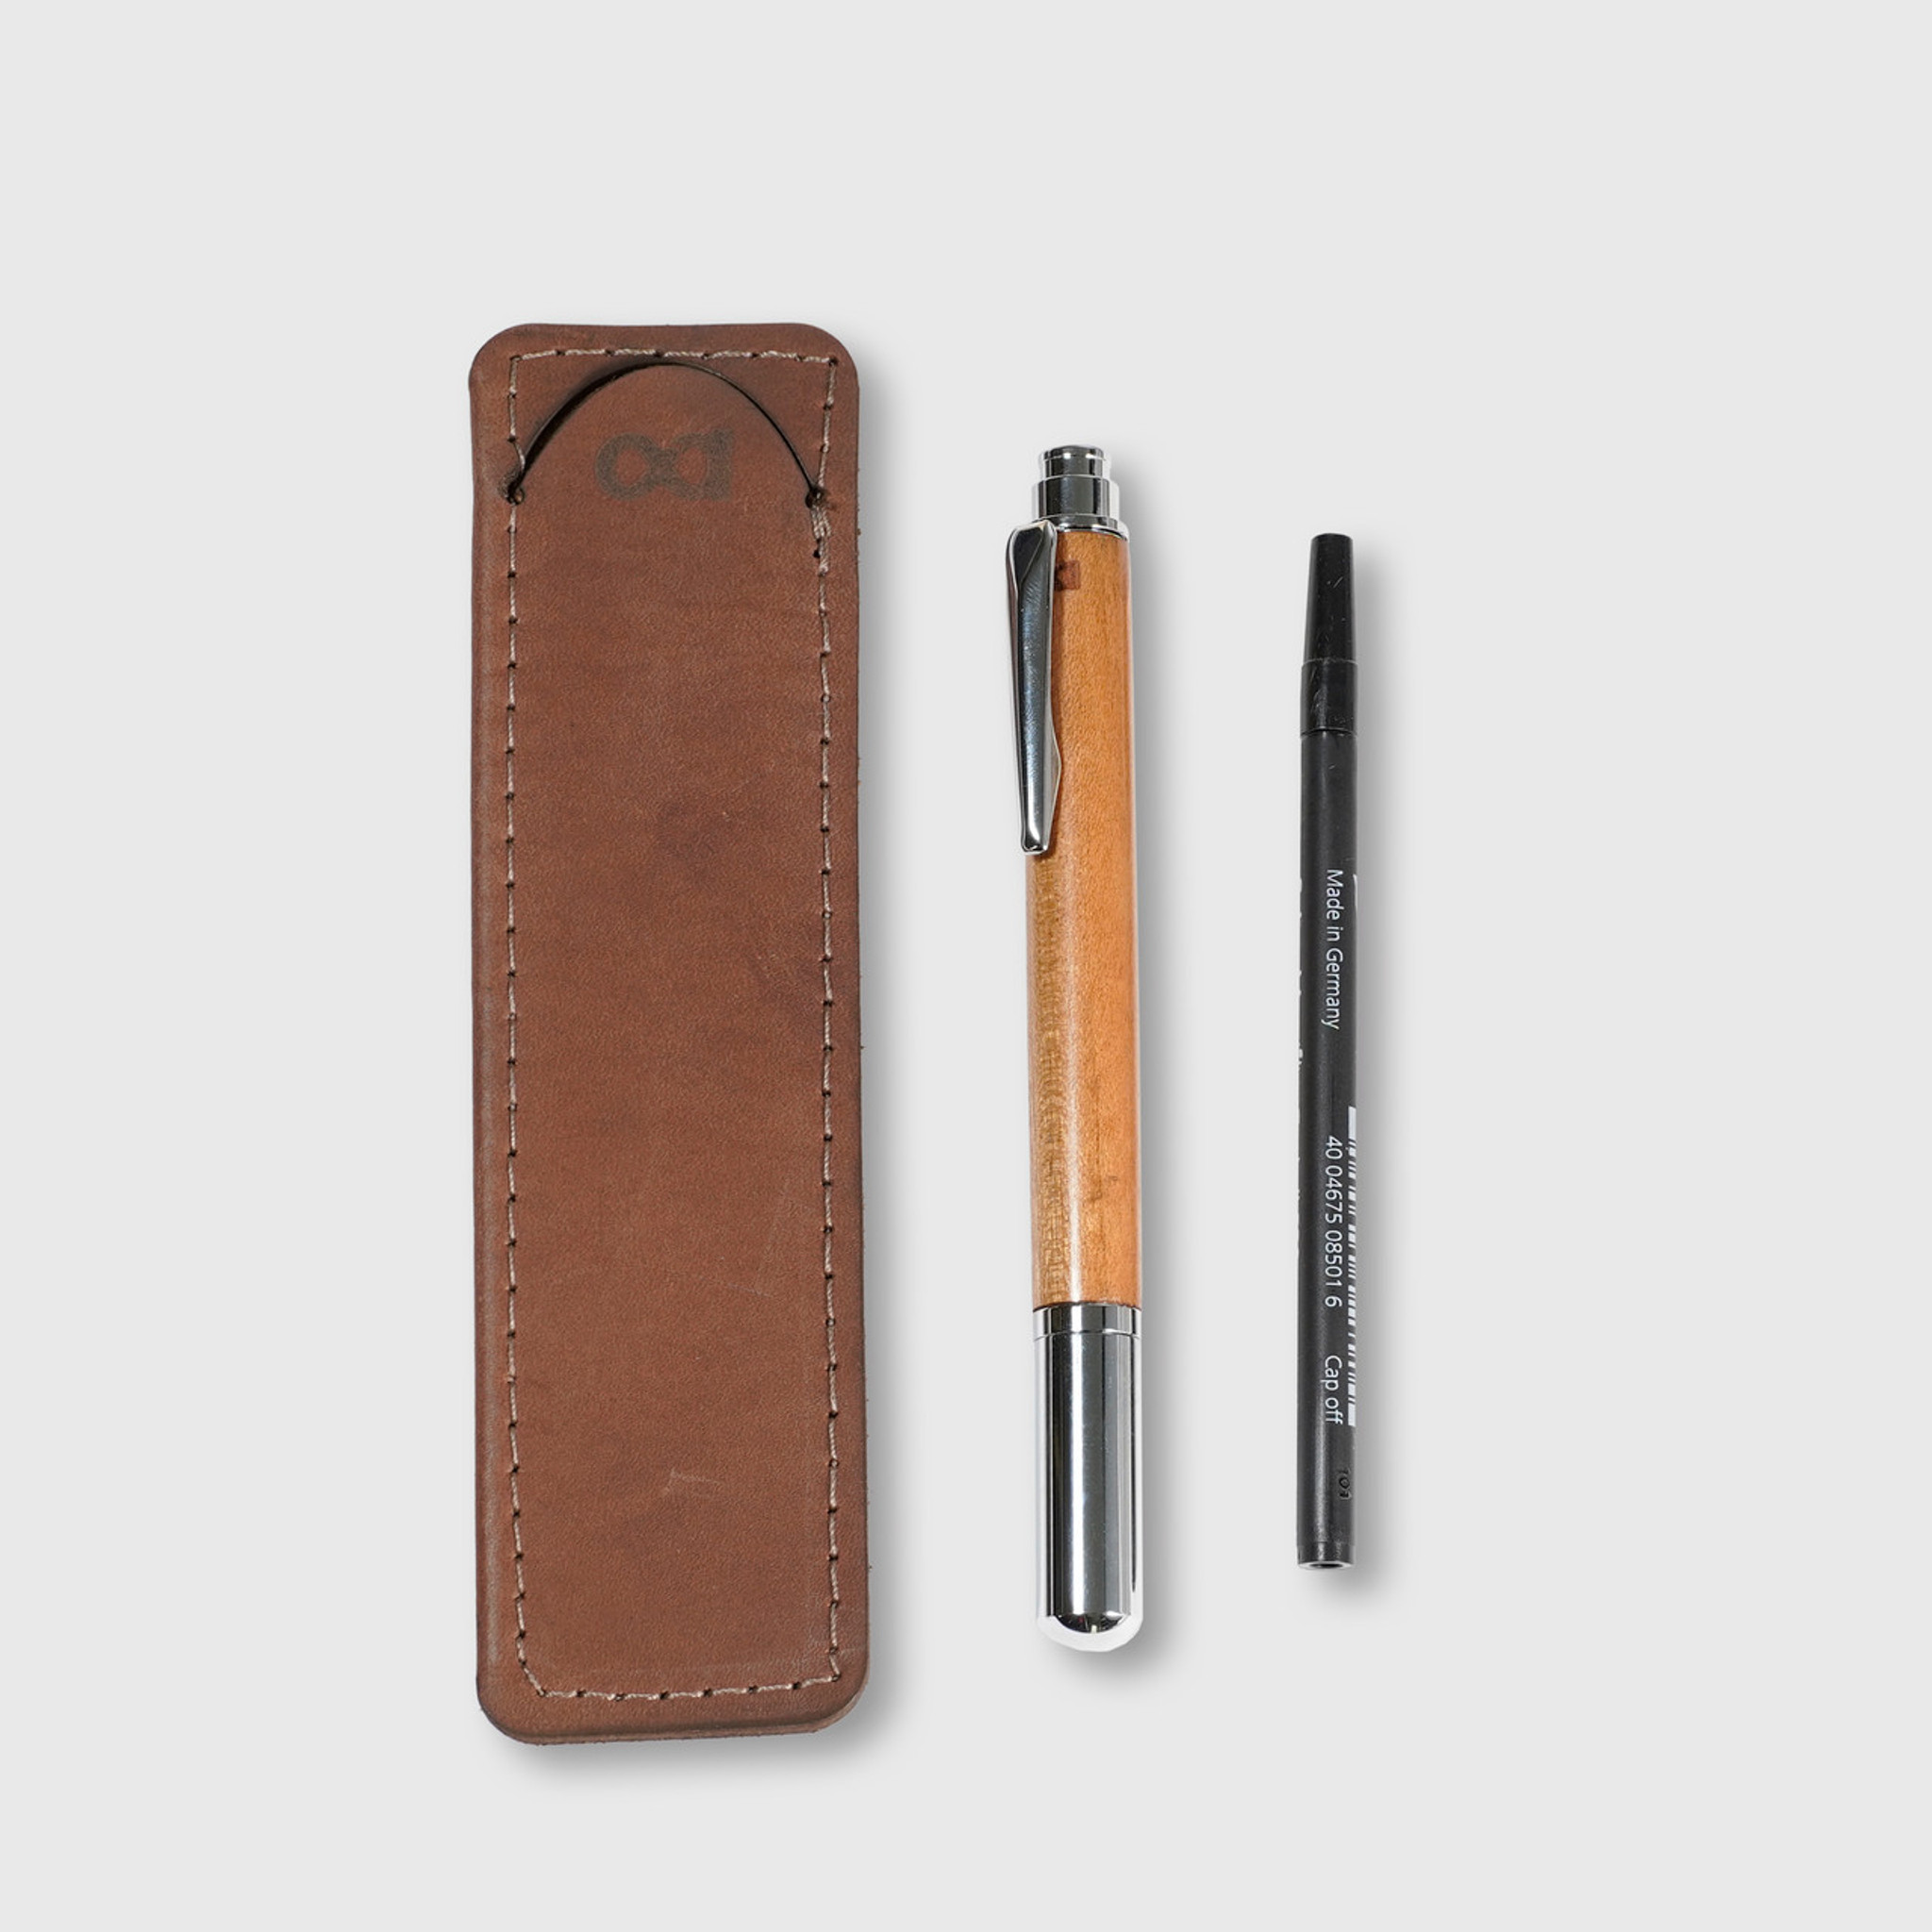 Allegory Handcrafted Goods The Model R, Rollerball Pen 